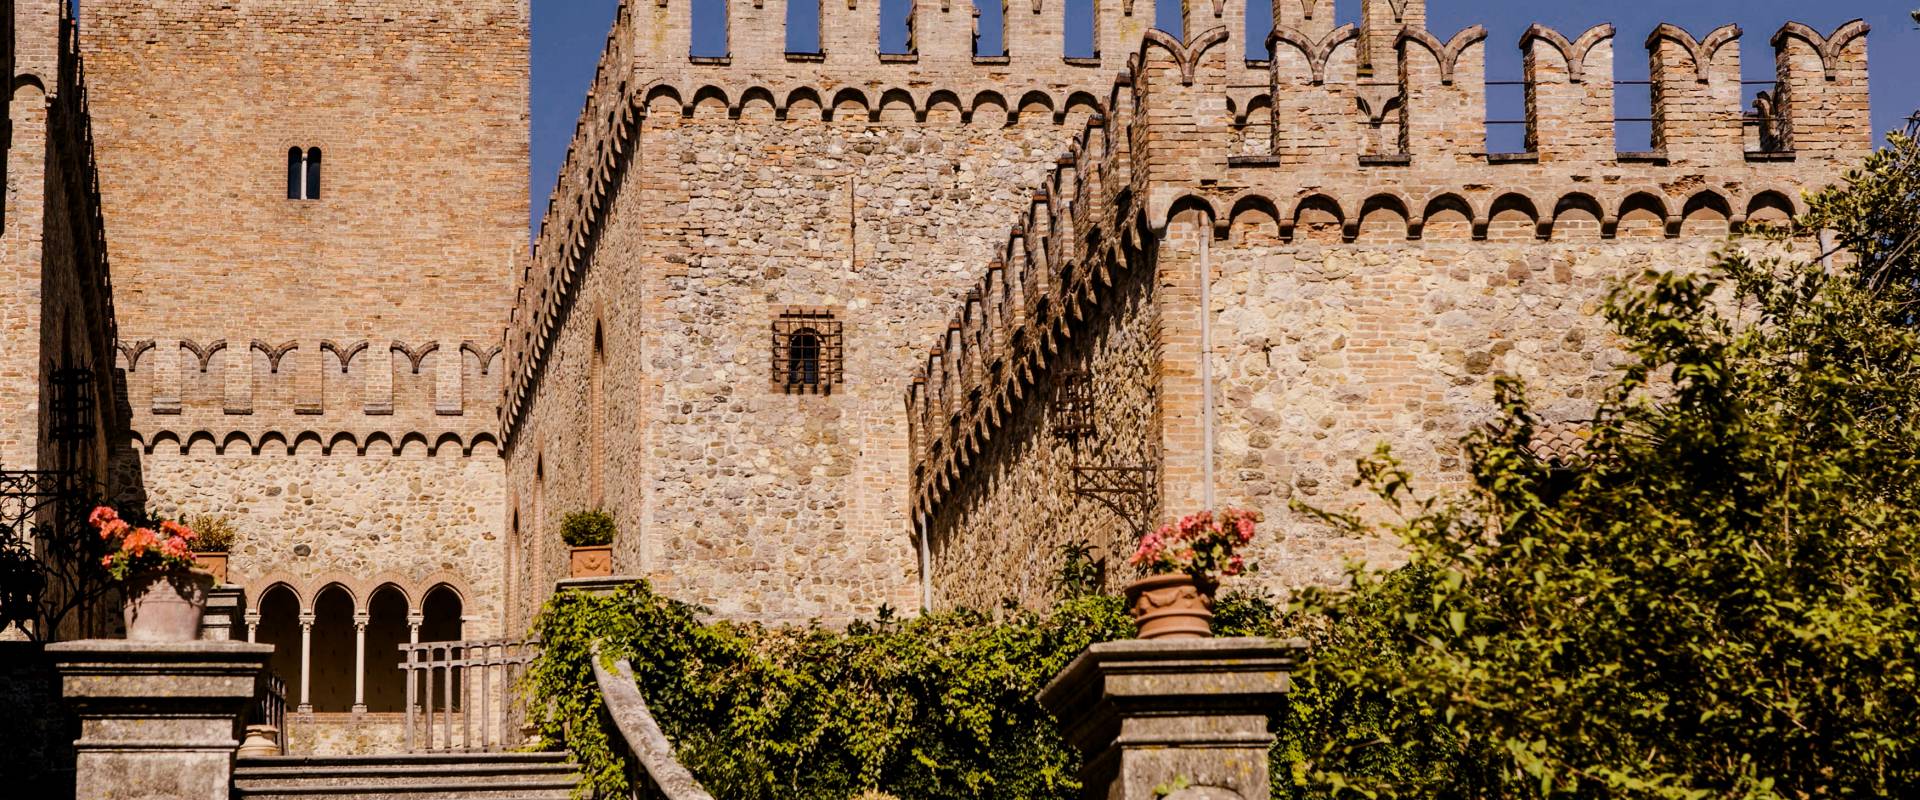 The terrace and the tower photo by Castello di Tabiano